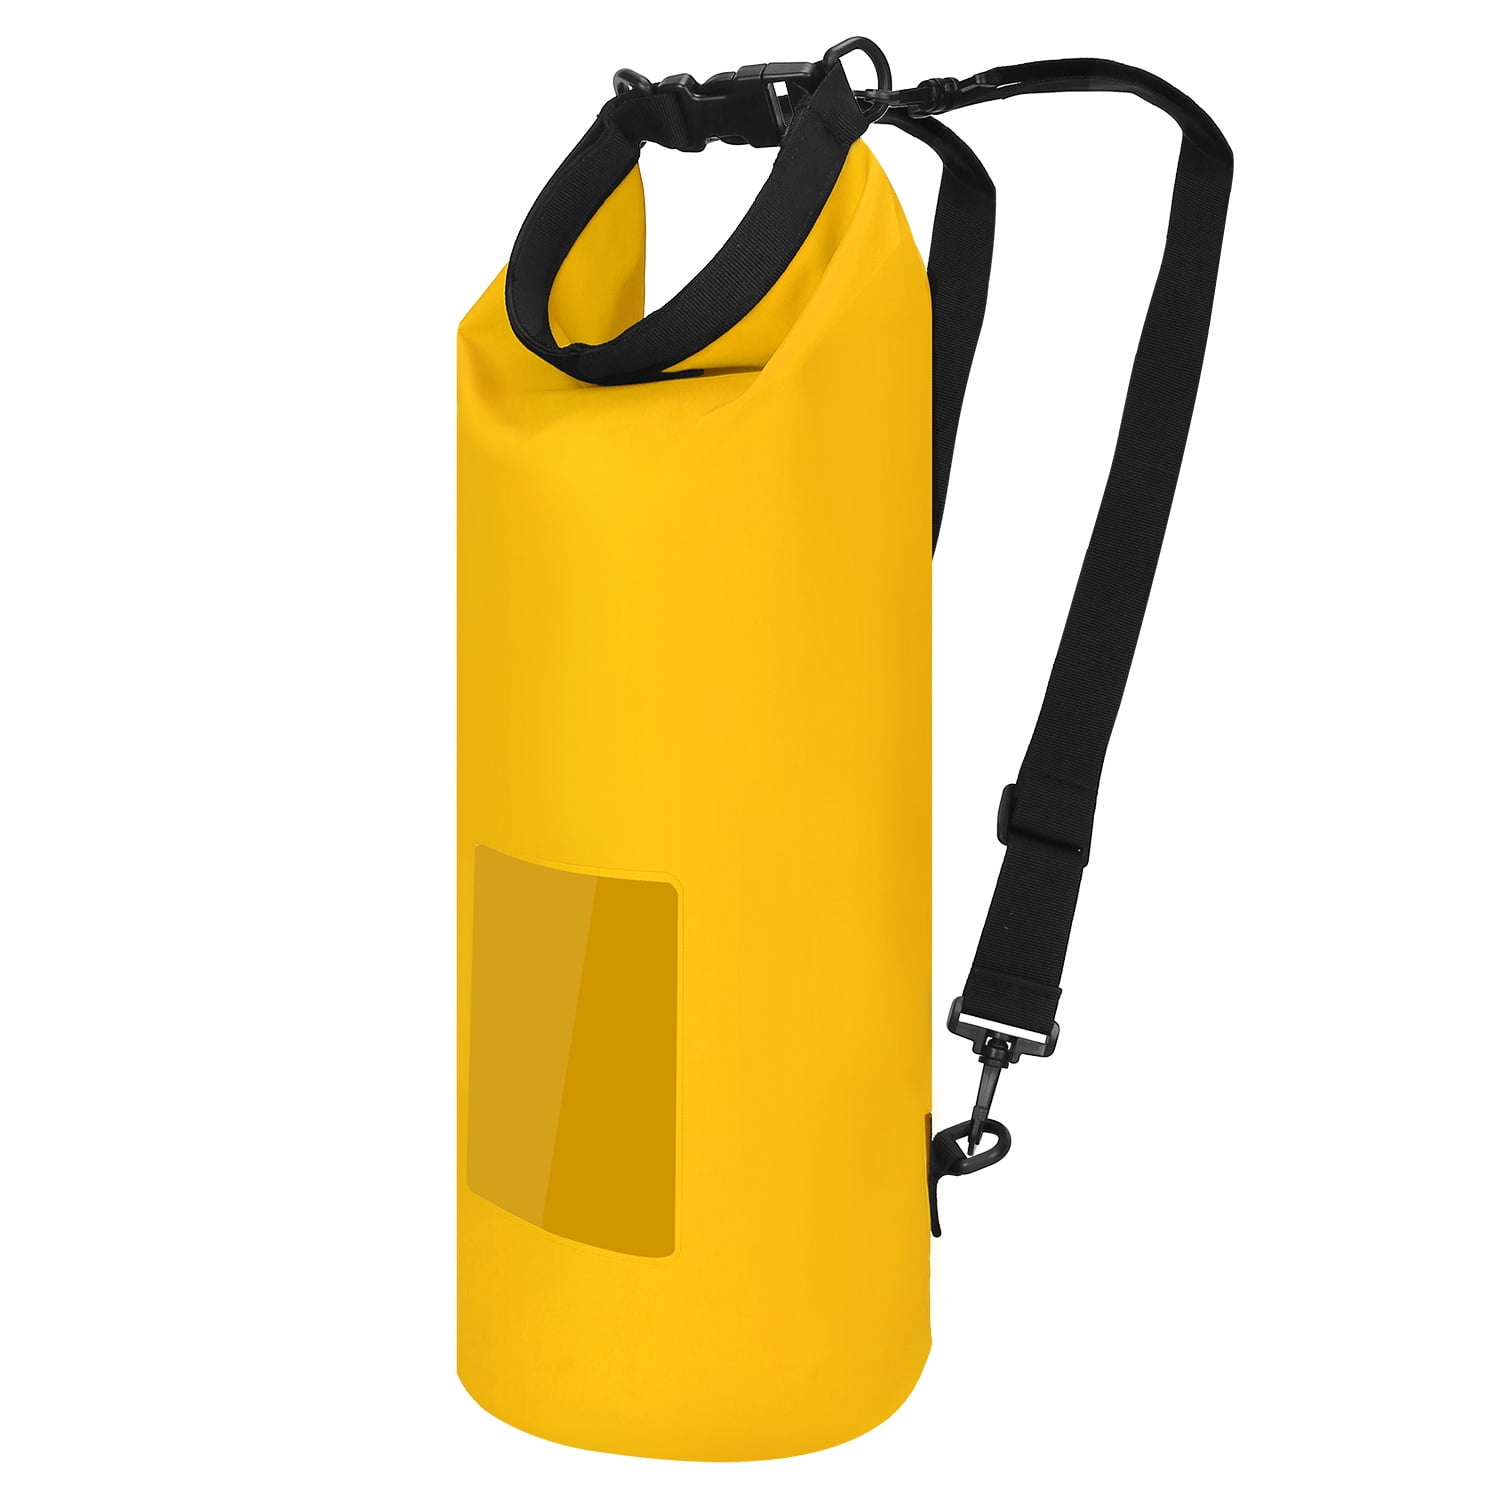 Customer reviews: Premium Waterproof Bag, Sack with Phone Dry  Bag and Long Adjustable Shoulder Strap Included, Perfect for  Kayaking/Boating/Canoeing/Fishing/Rafting/Swimming/Camping/Snowboarding  (Yellow 10 L) …